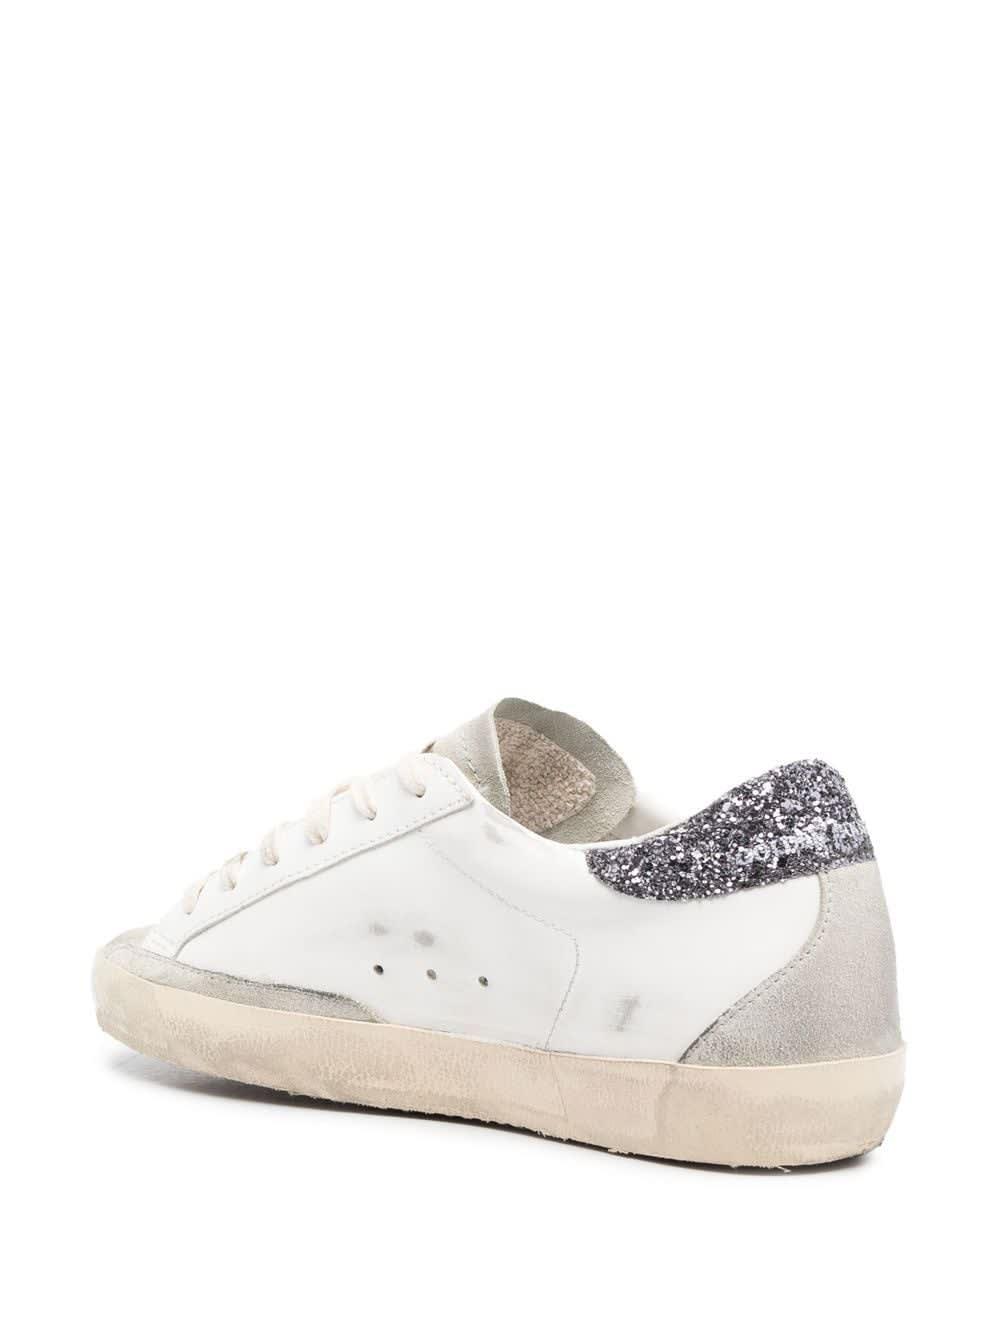 Golden Goose Women Superstar Classic With Spur Sneakers in White | Lyst